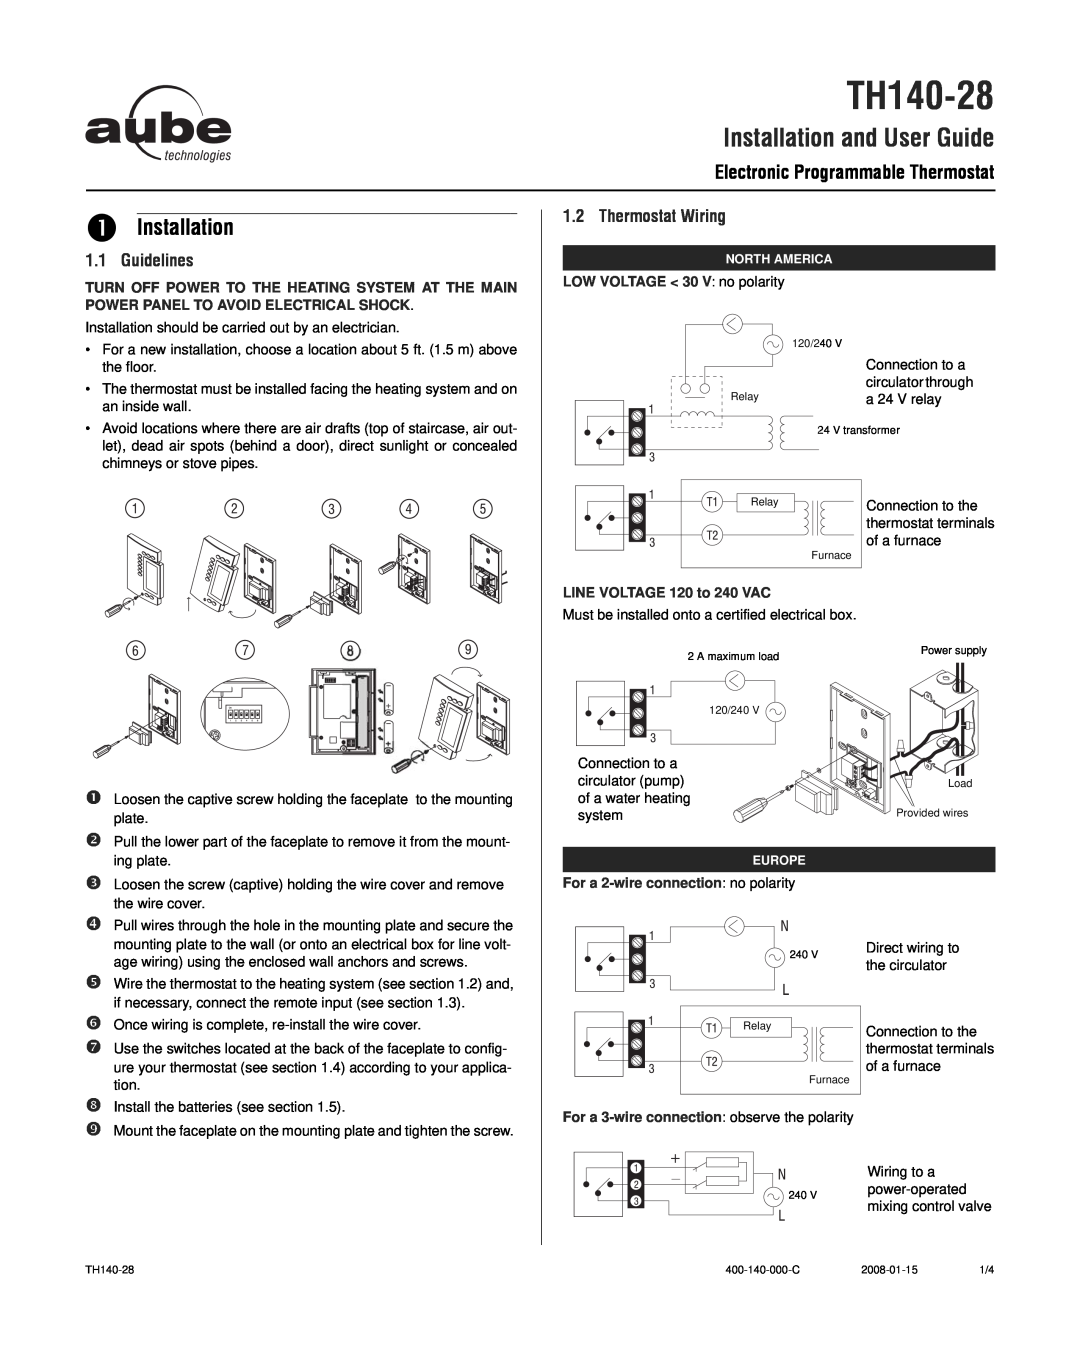 Aube Technologies TH140-28 manual n Installation, Guidelines, Thermostat Wiring, Installation and User Guide 